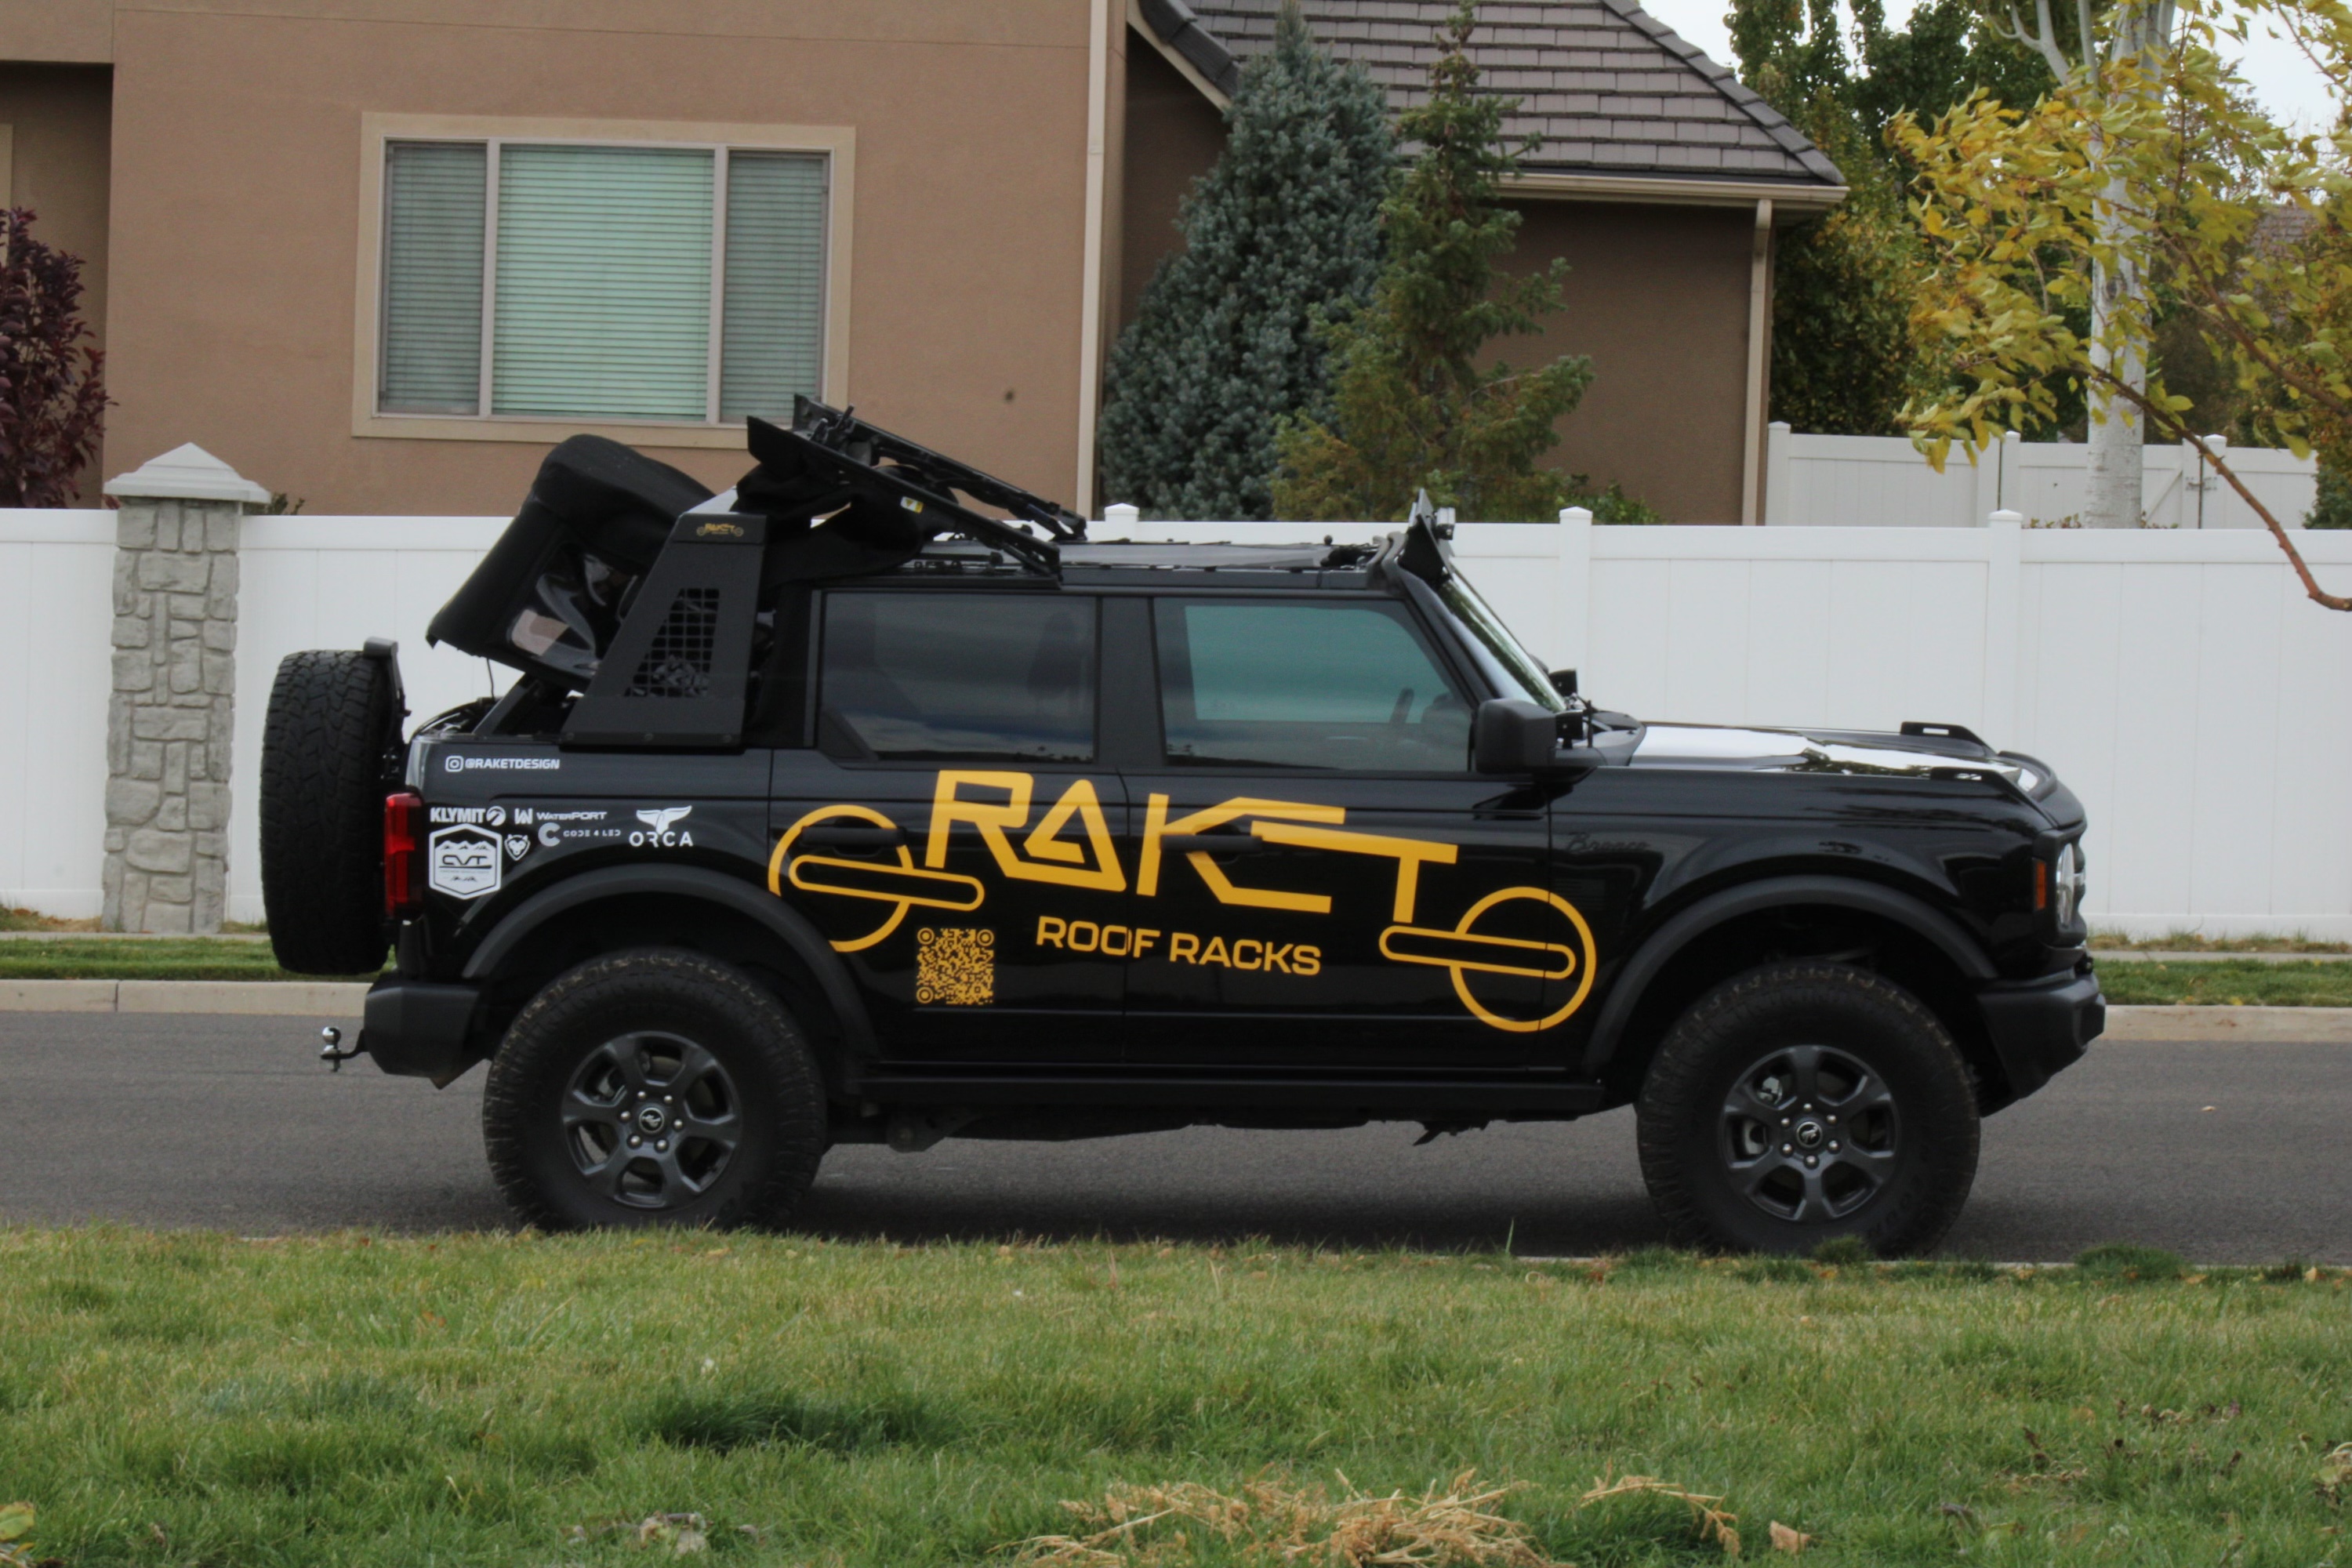 Ford Bronco IN PRODUCTION: Meet the new RAKET roof rack 5B1A0D95-C3B2-41B5-BE60-D930A816625E